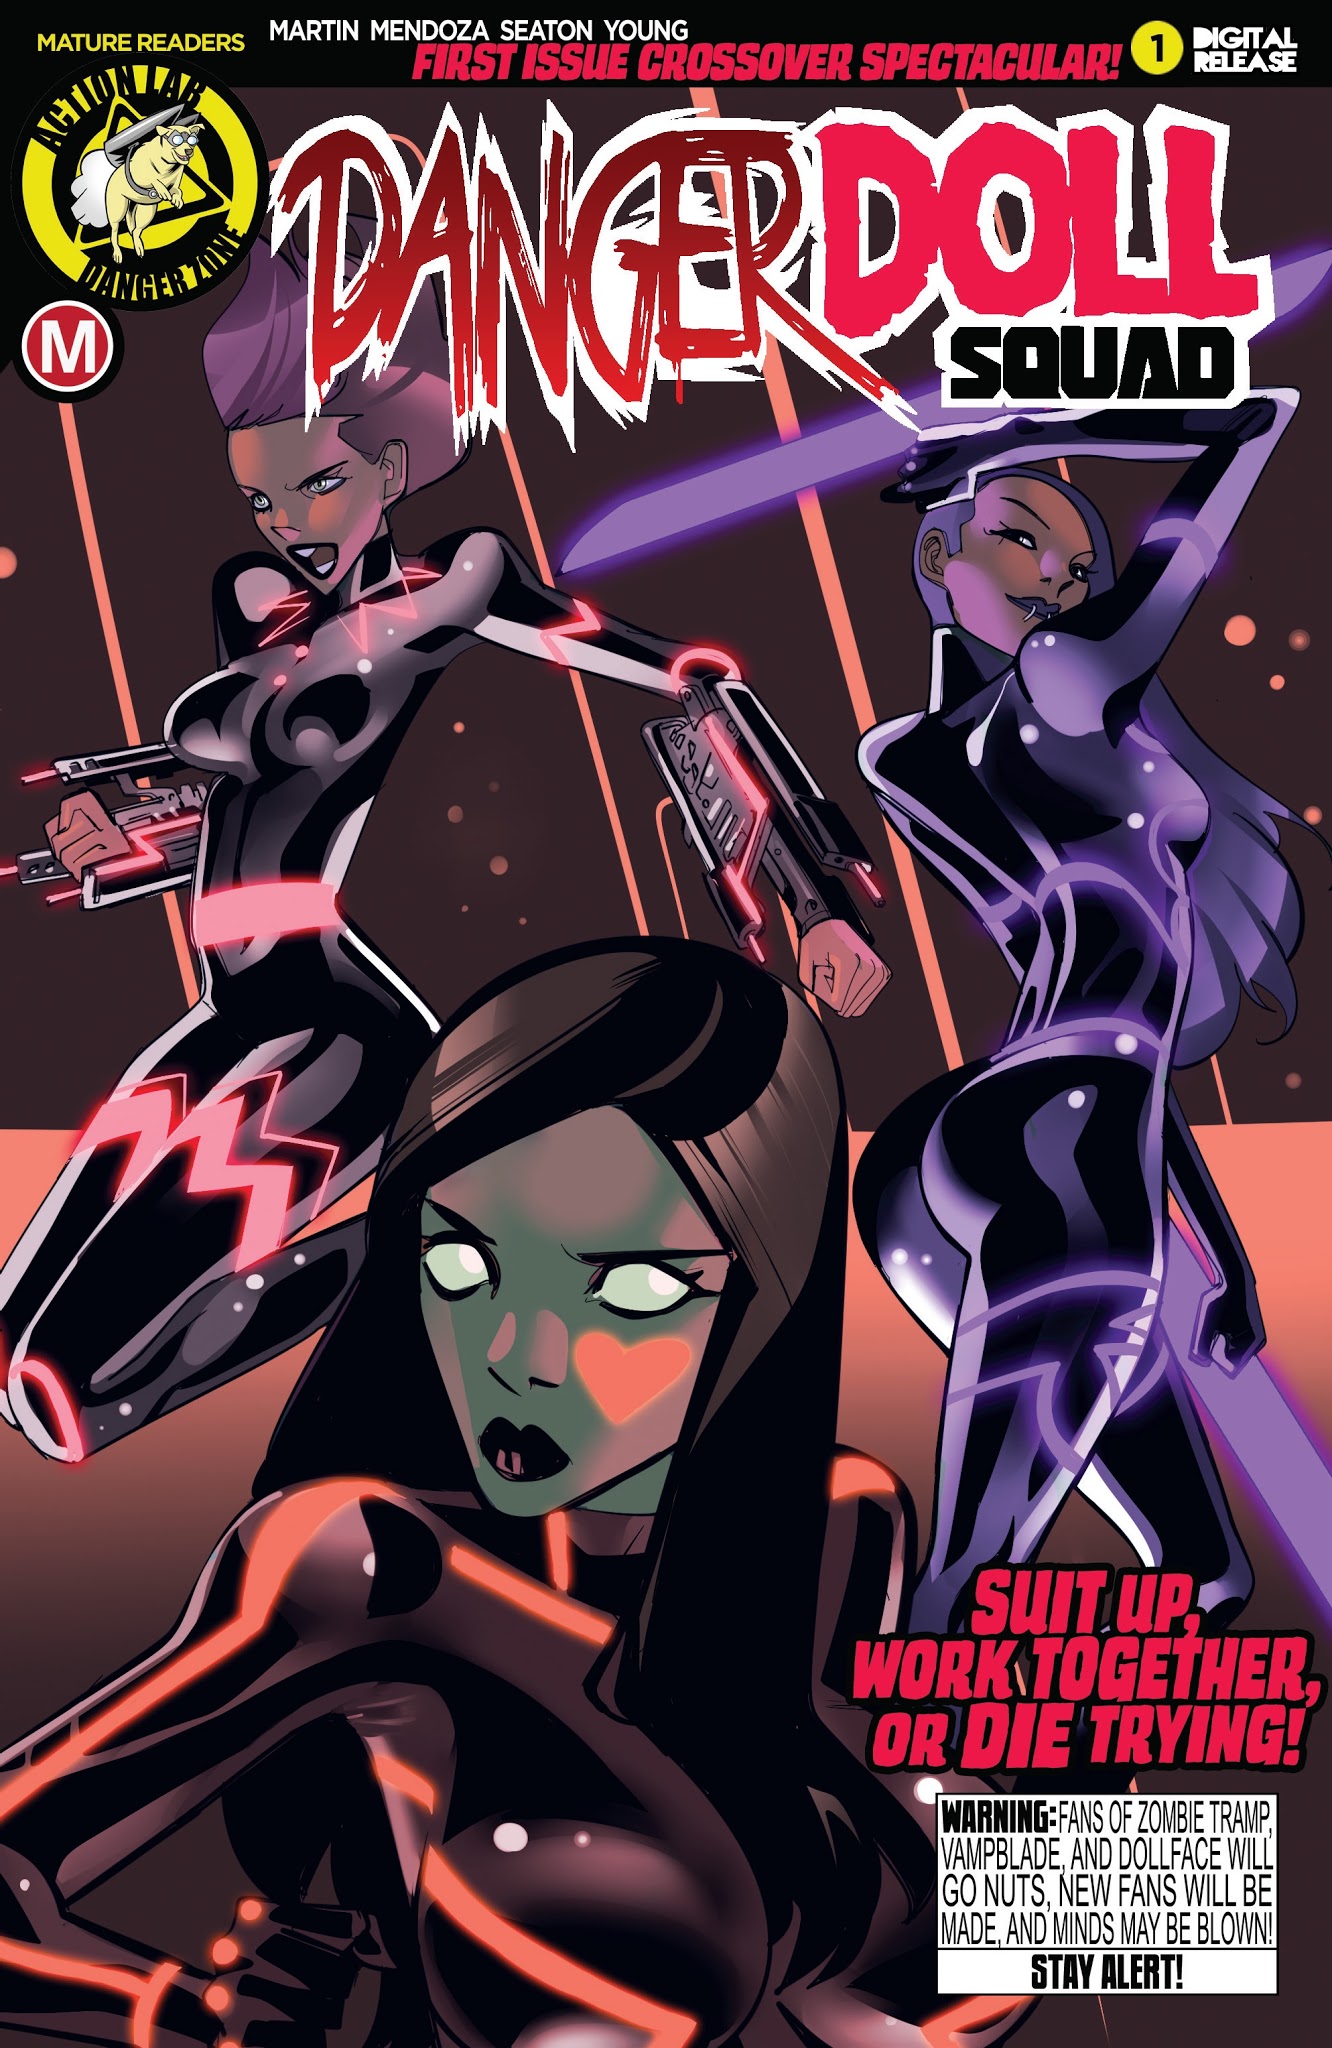 Read online Danger Doll Squad comic -  Issue #1 - 1